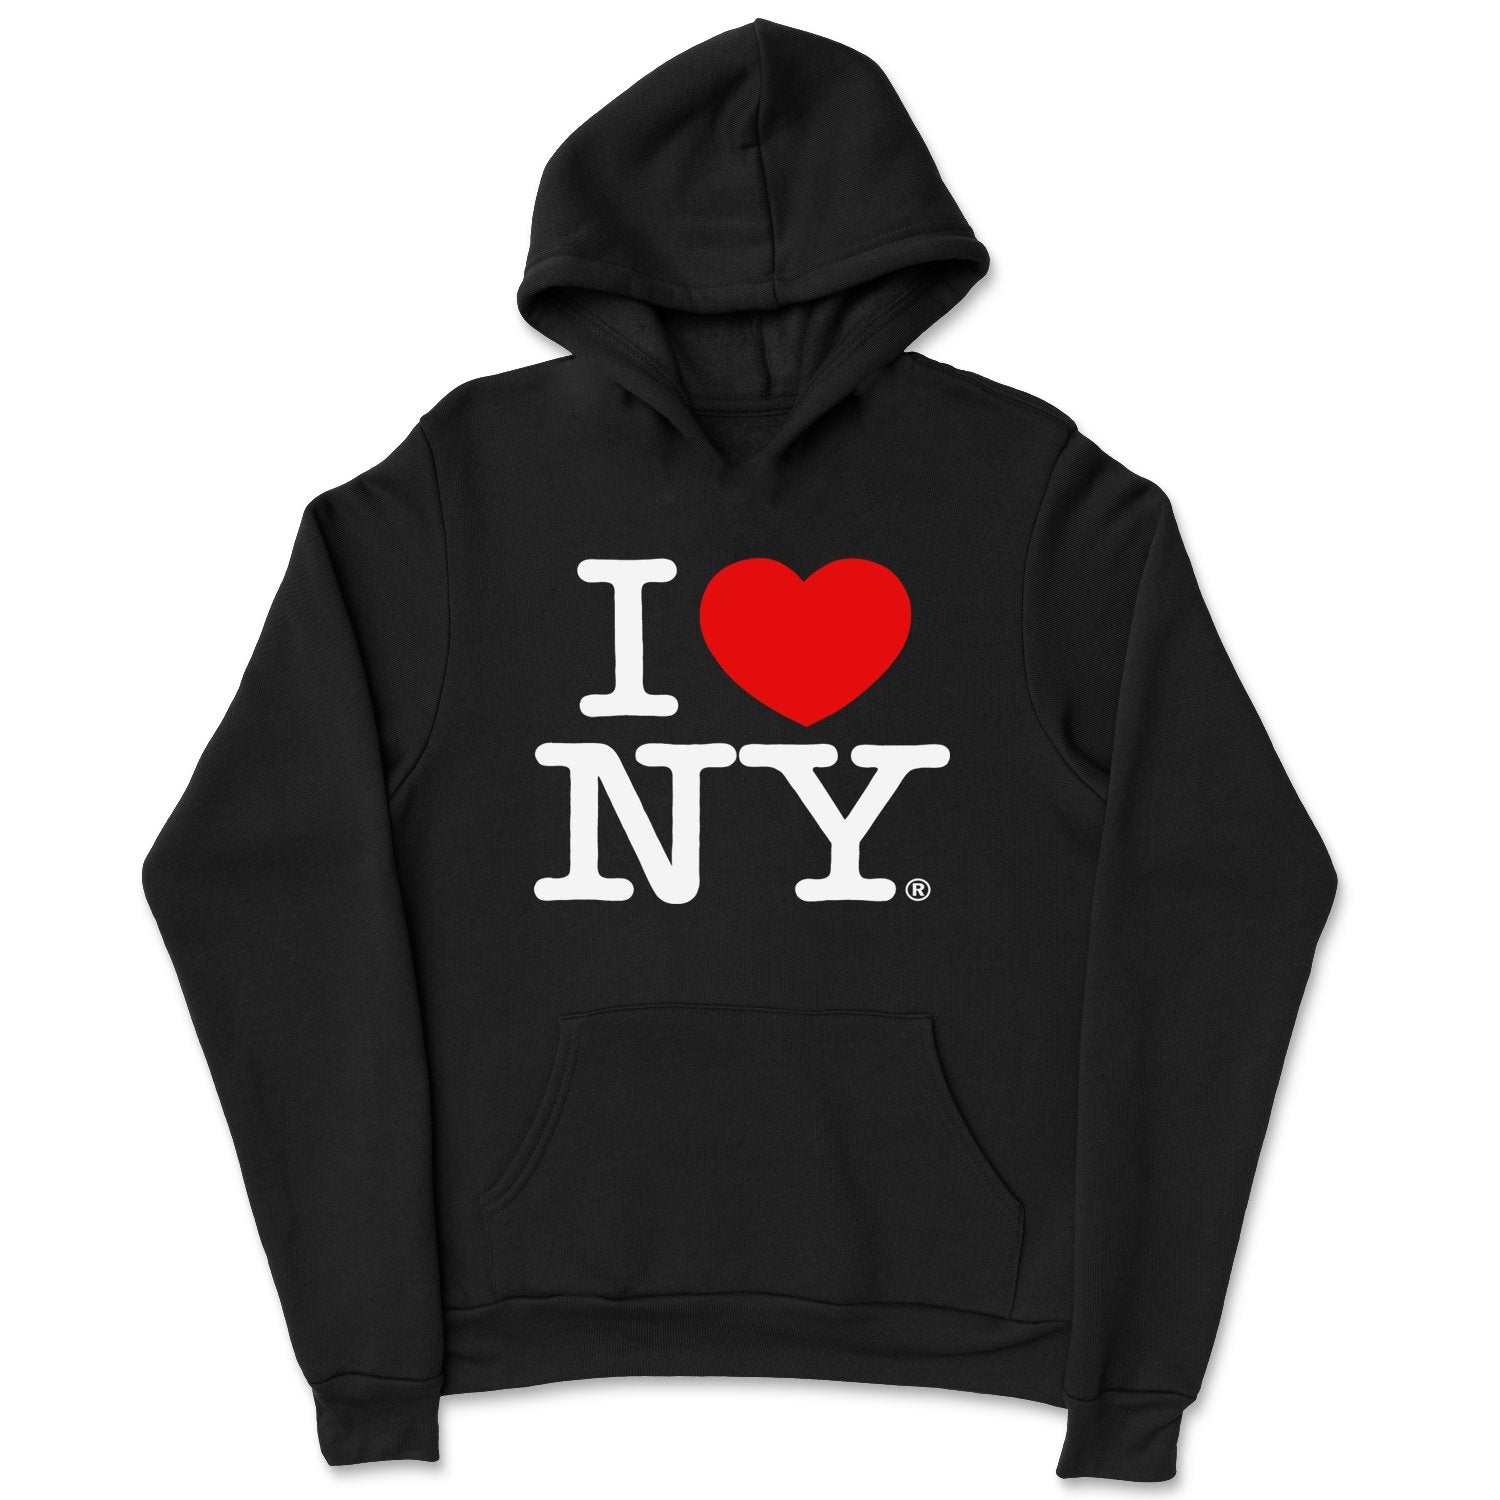 I Love NY Kids Hoodie Sweatshirt Officially Licensed (Youth, Black)